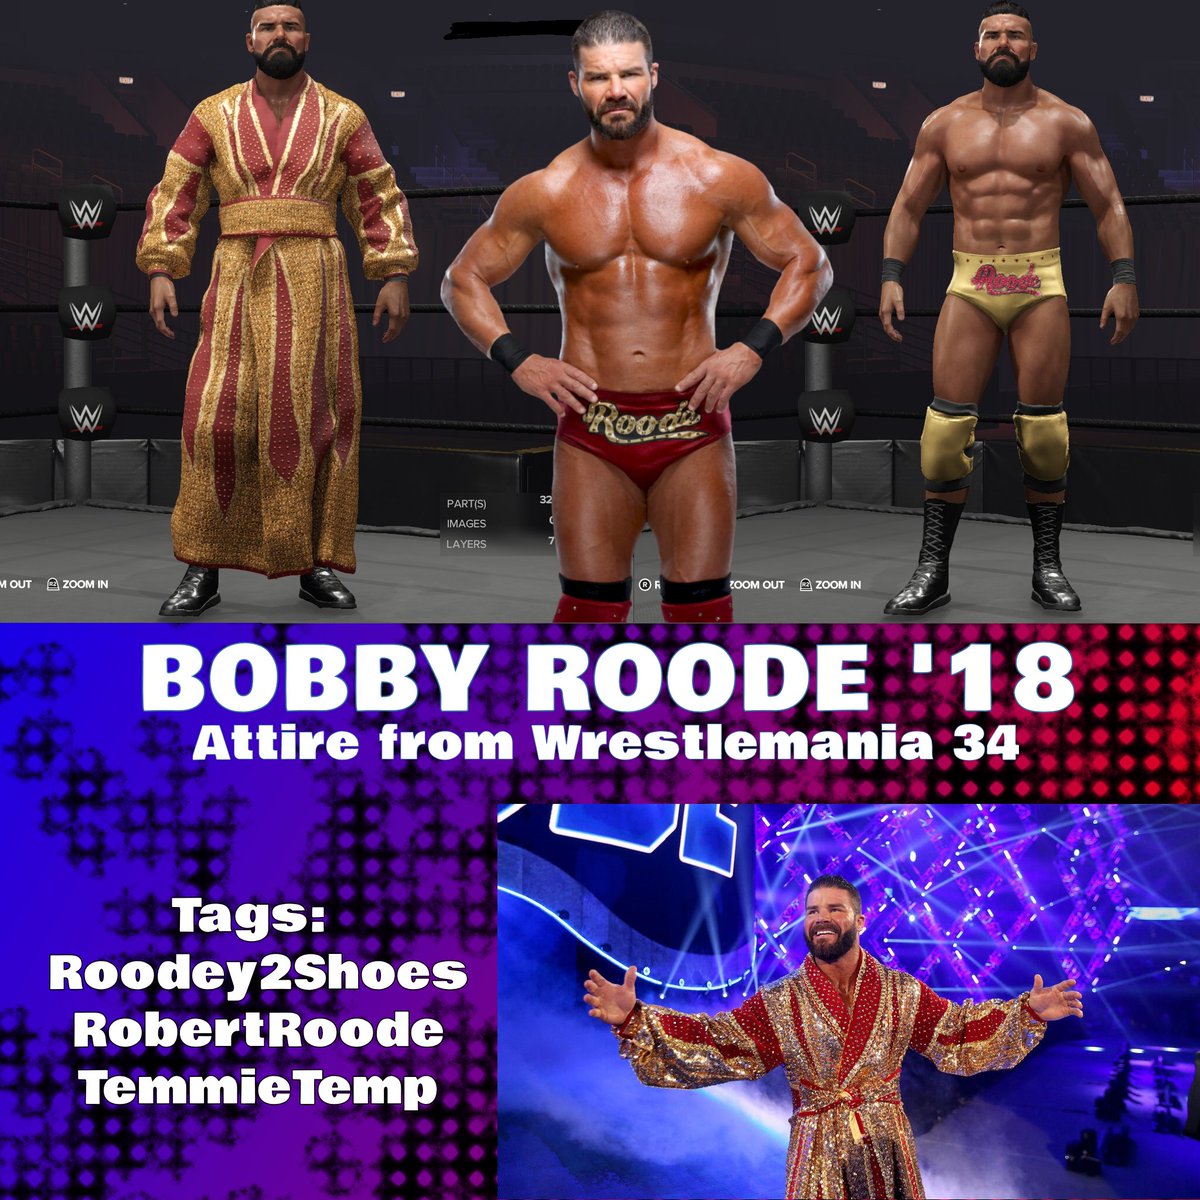 Might as well throw my hat in the ring... No pun intended
#WWE2K24 
Uploaded: Bobby Roode 2018
Featuring his attires from Fastlane 2018 and Wrestlemania 34! 
Tags: Roodey2Shoe, RobertRoode, TemmieTemp
-NOT AUTO SET! GO INTO CREATE A SUPERSTAR, EDIT THIS ATTIRE AND SET AS ALT-